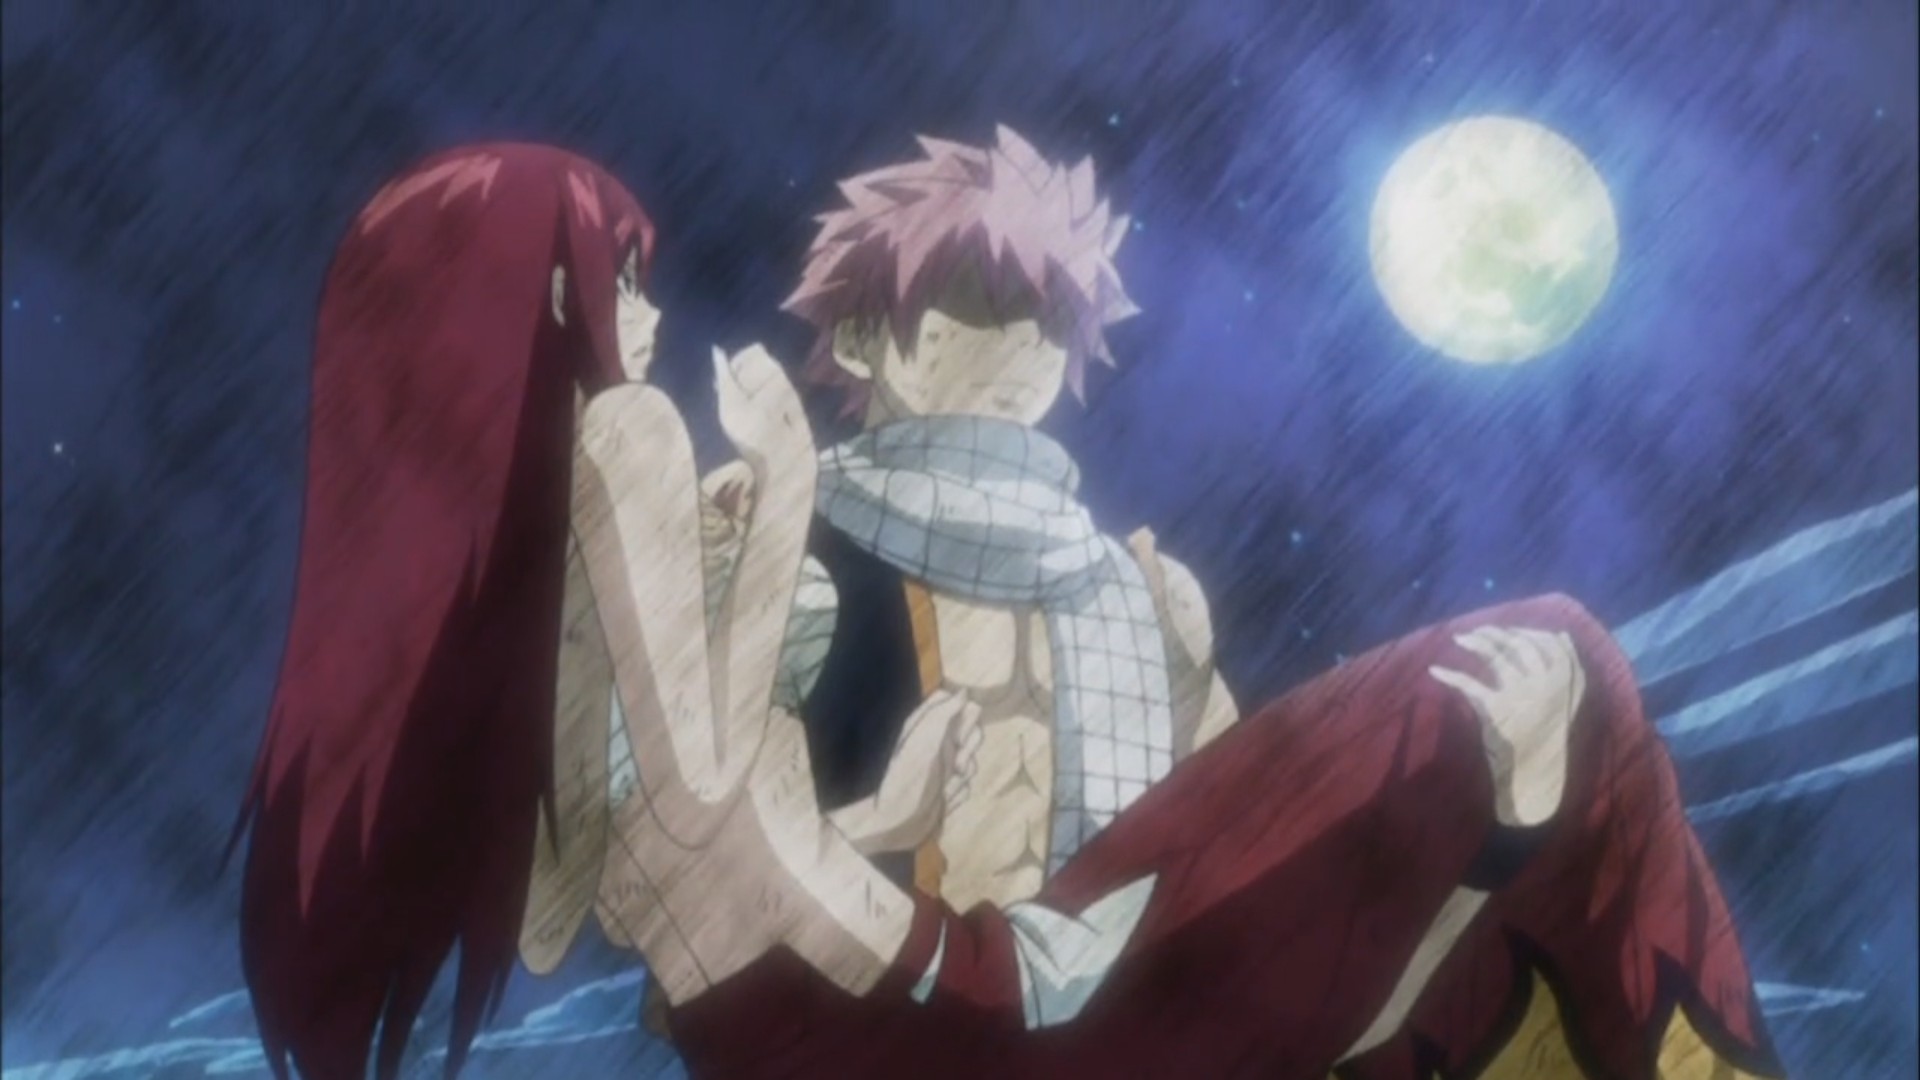 Fairy Tail Scarlet Erza Dragneel Natsu Hd Wallpapers Desktop And Mobile Images Photos